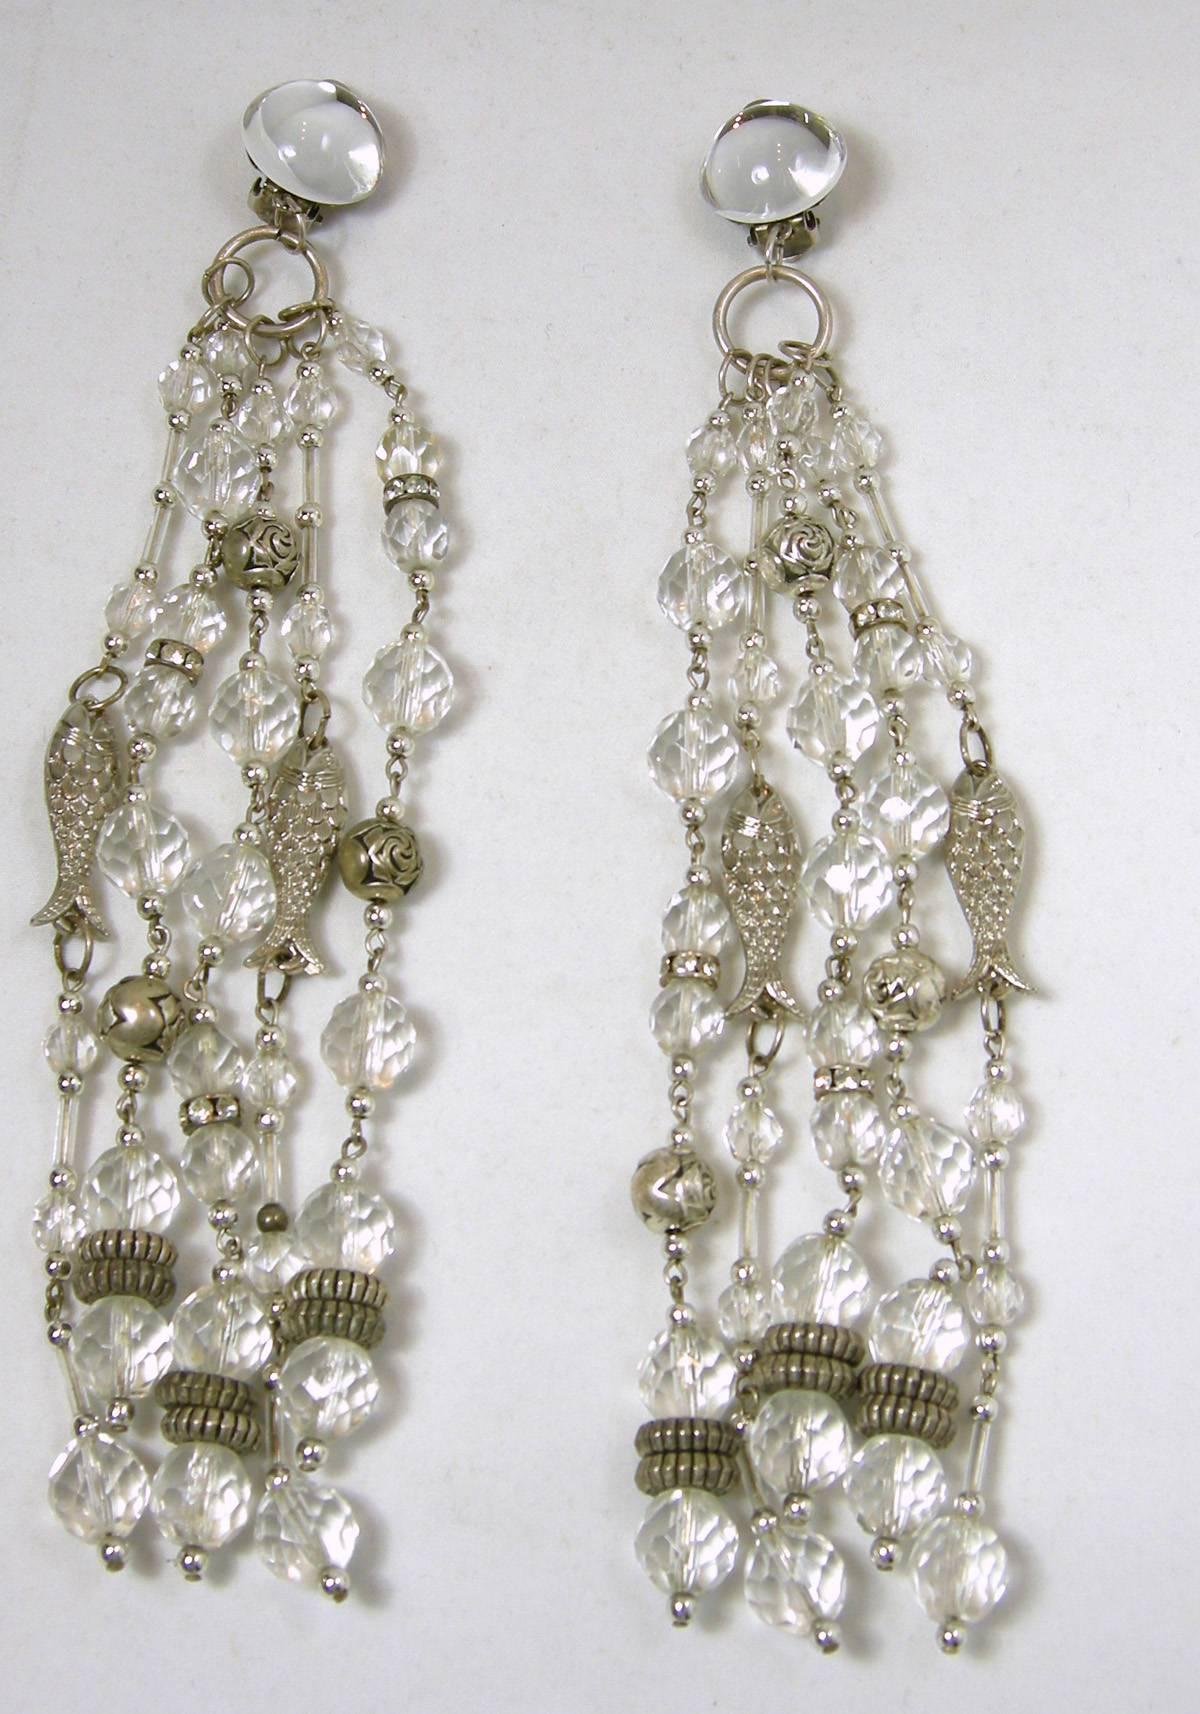 These clip back shoulder duster earrings feature dangling large sparkling Lucite beads with thin silver tone fish.  The Lucite has silver connectors and beads that decorate the earrings. They measure 6-1/2” x 2” and are in excellent condition.